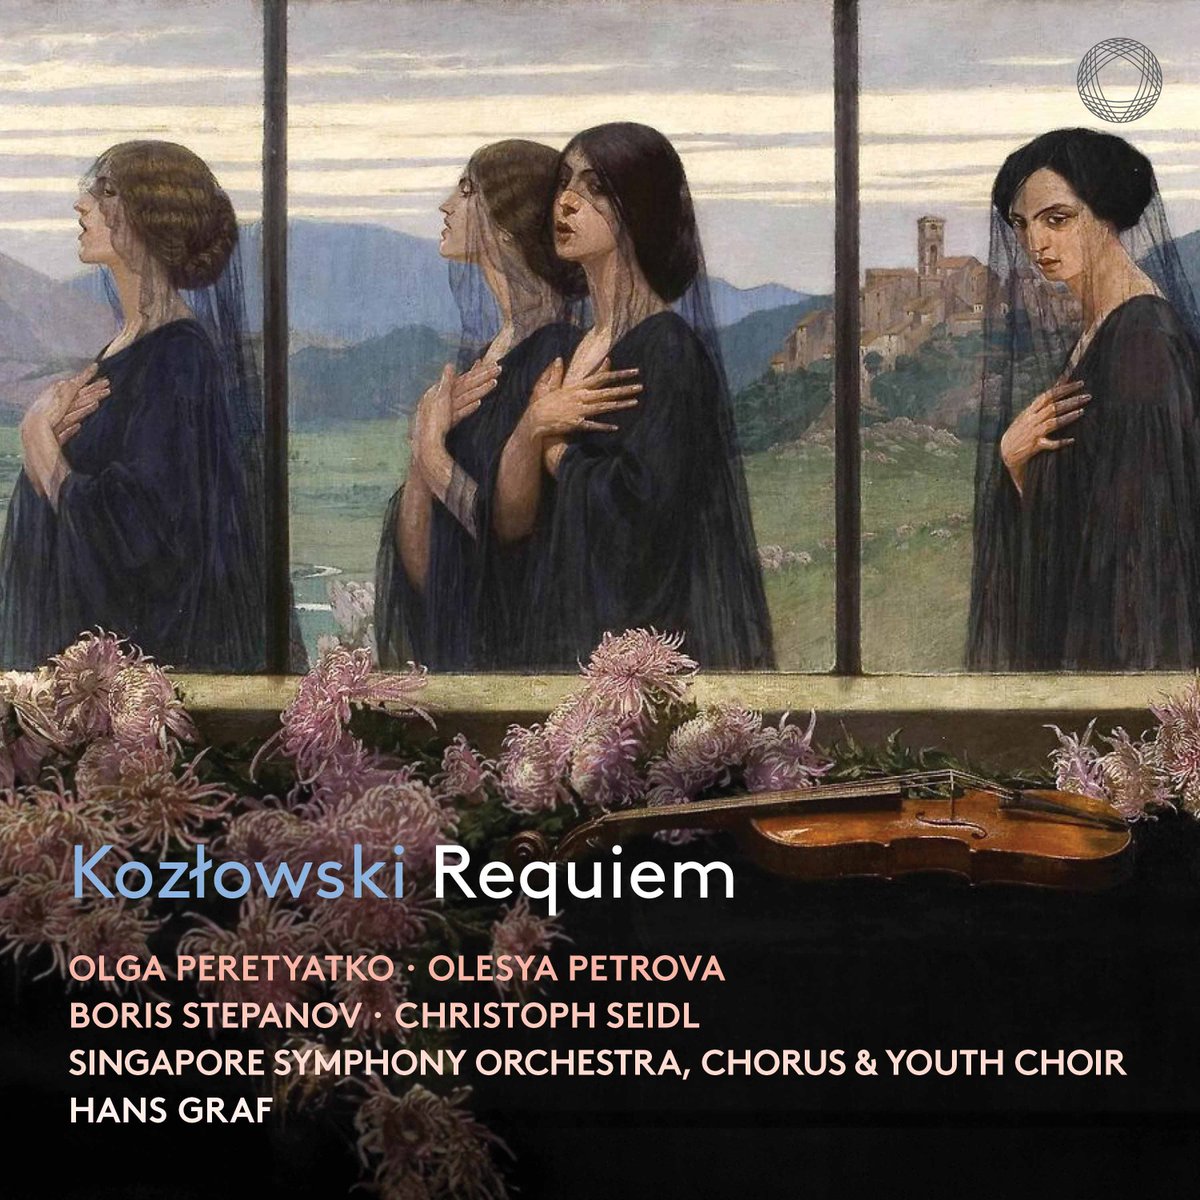 The @SingaporeSymph and its Music Director Hans Graf present a recording of Kozłowski’s Requiem, together with the Singapore Symphony Chorus & Singapore Symphony Youth Choir as well as a quartet of soloists: @Olgaperetyatko, #OlesyaPetrova, #BorisStepanov and #ChristophSeidl.